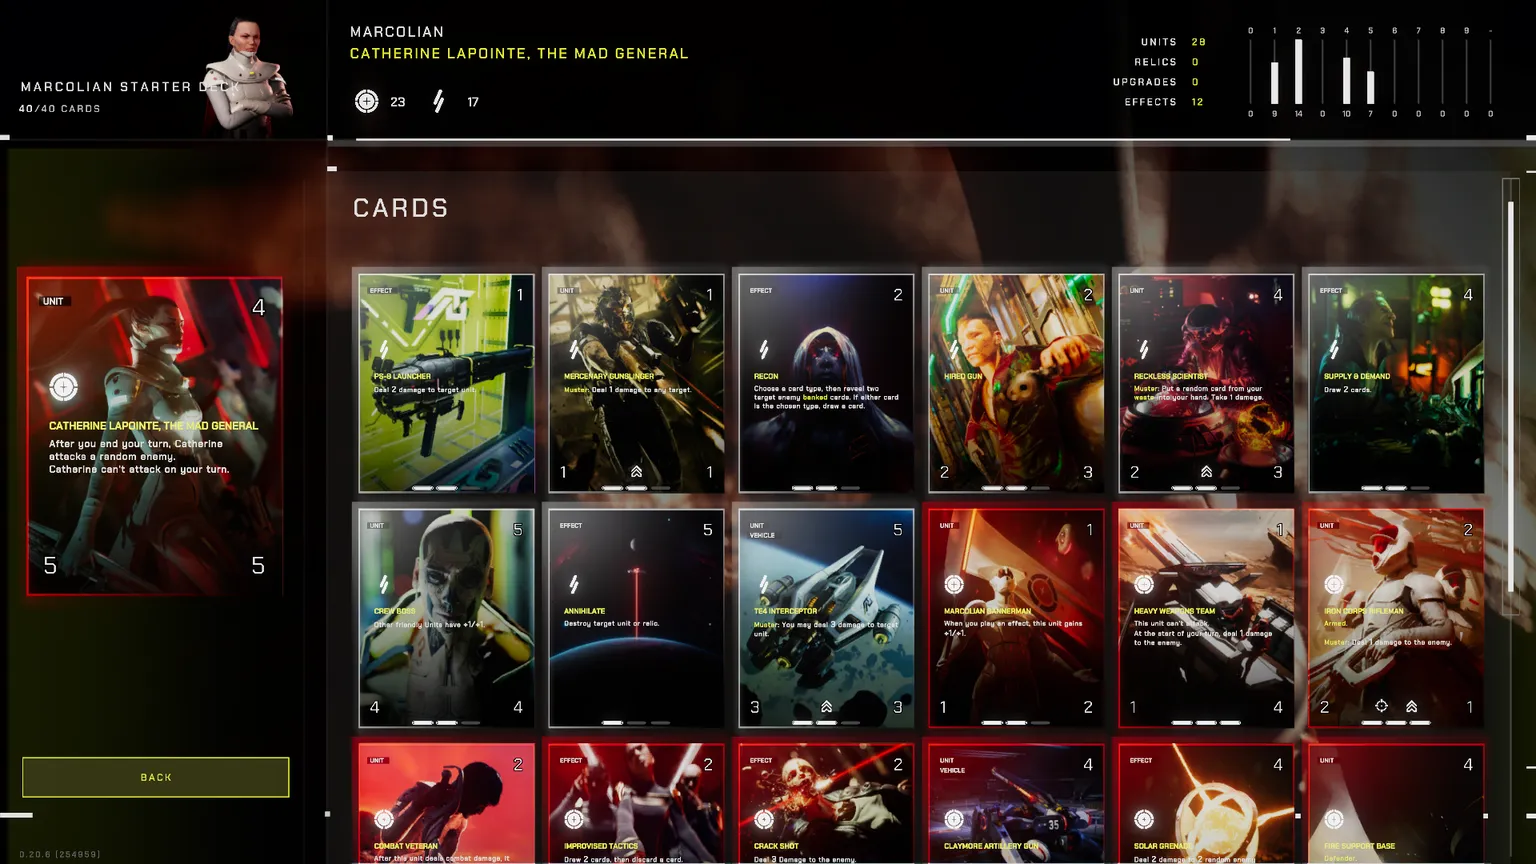 In-game screenshot from Parallel showing 18 different cards plus the Catherine paragon card. Most cards are fire-colored and themed around offensive plays.